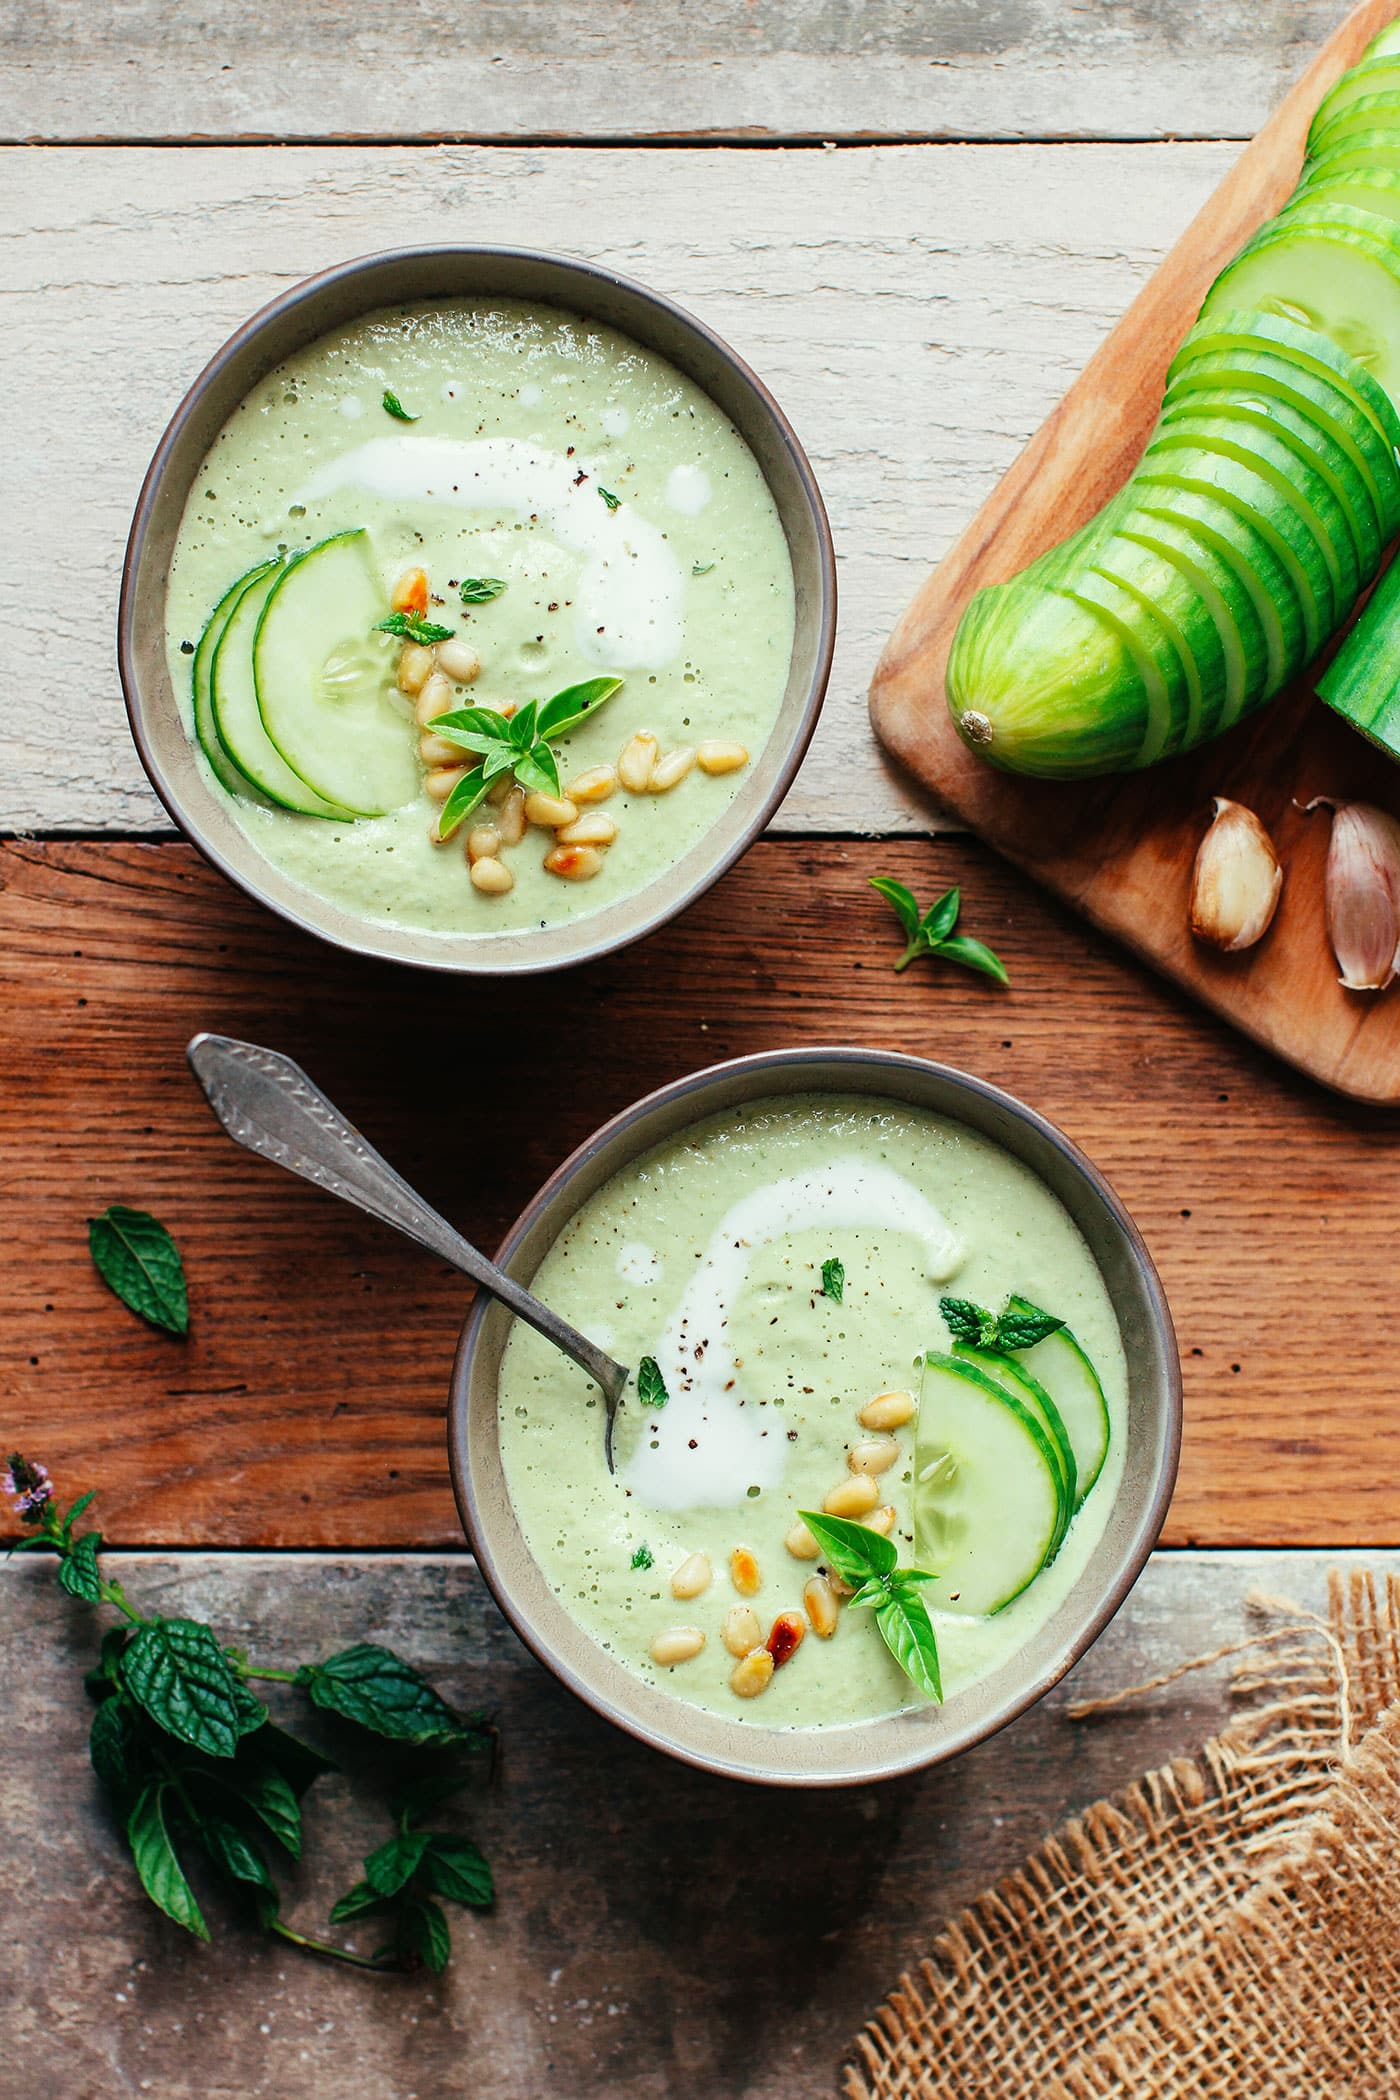 Two bowls of creamy cucumber soup from the best vegan soup recipes, garnished with pine nuts and fresh herbs, with sliced cucumbers and garlic on a wooden board.